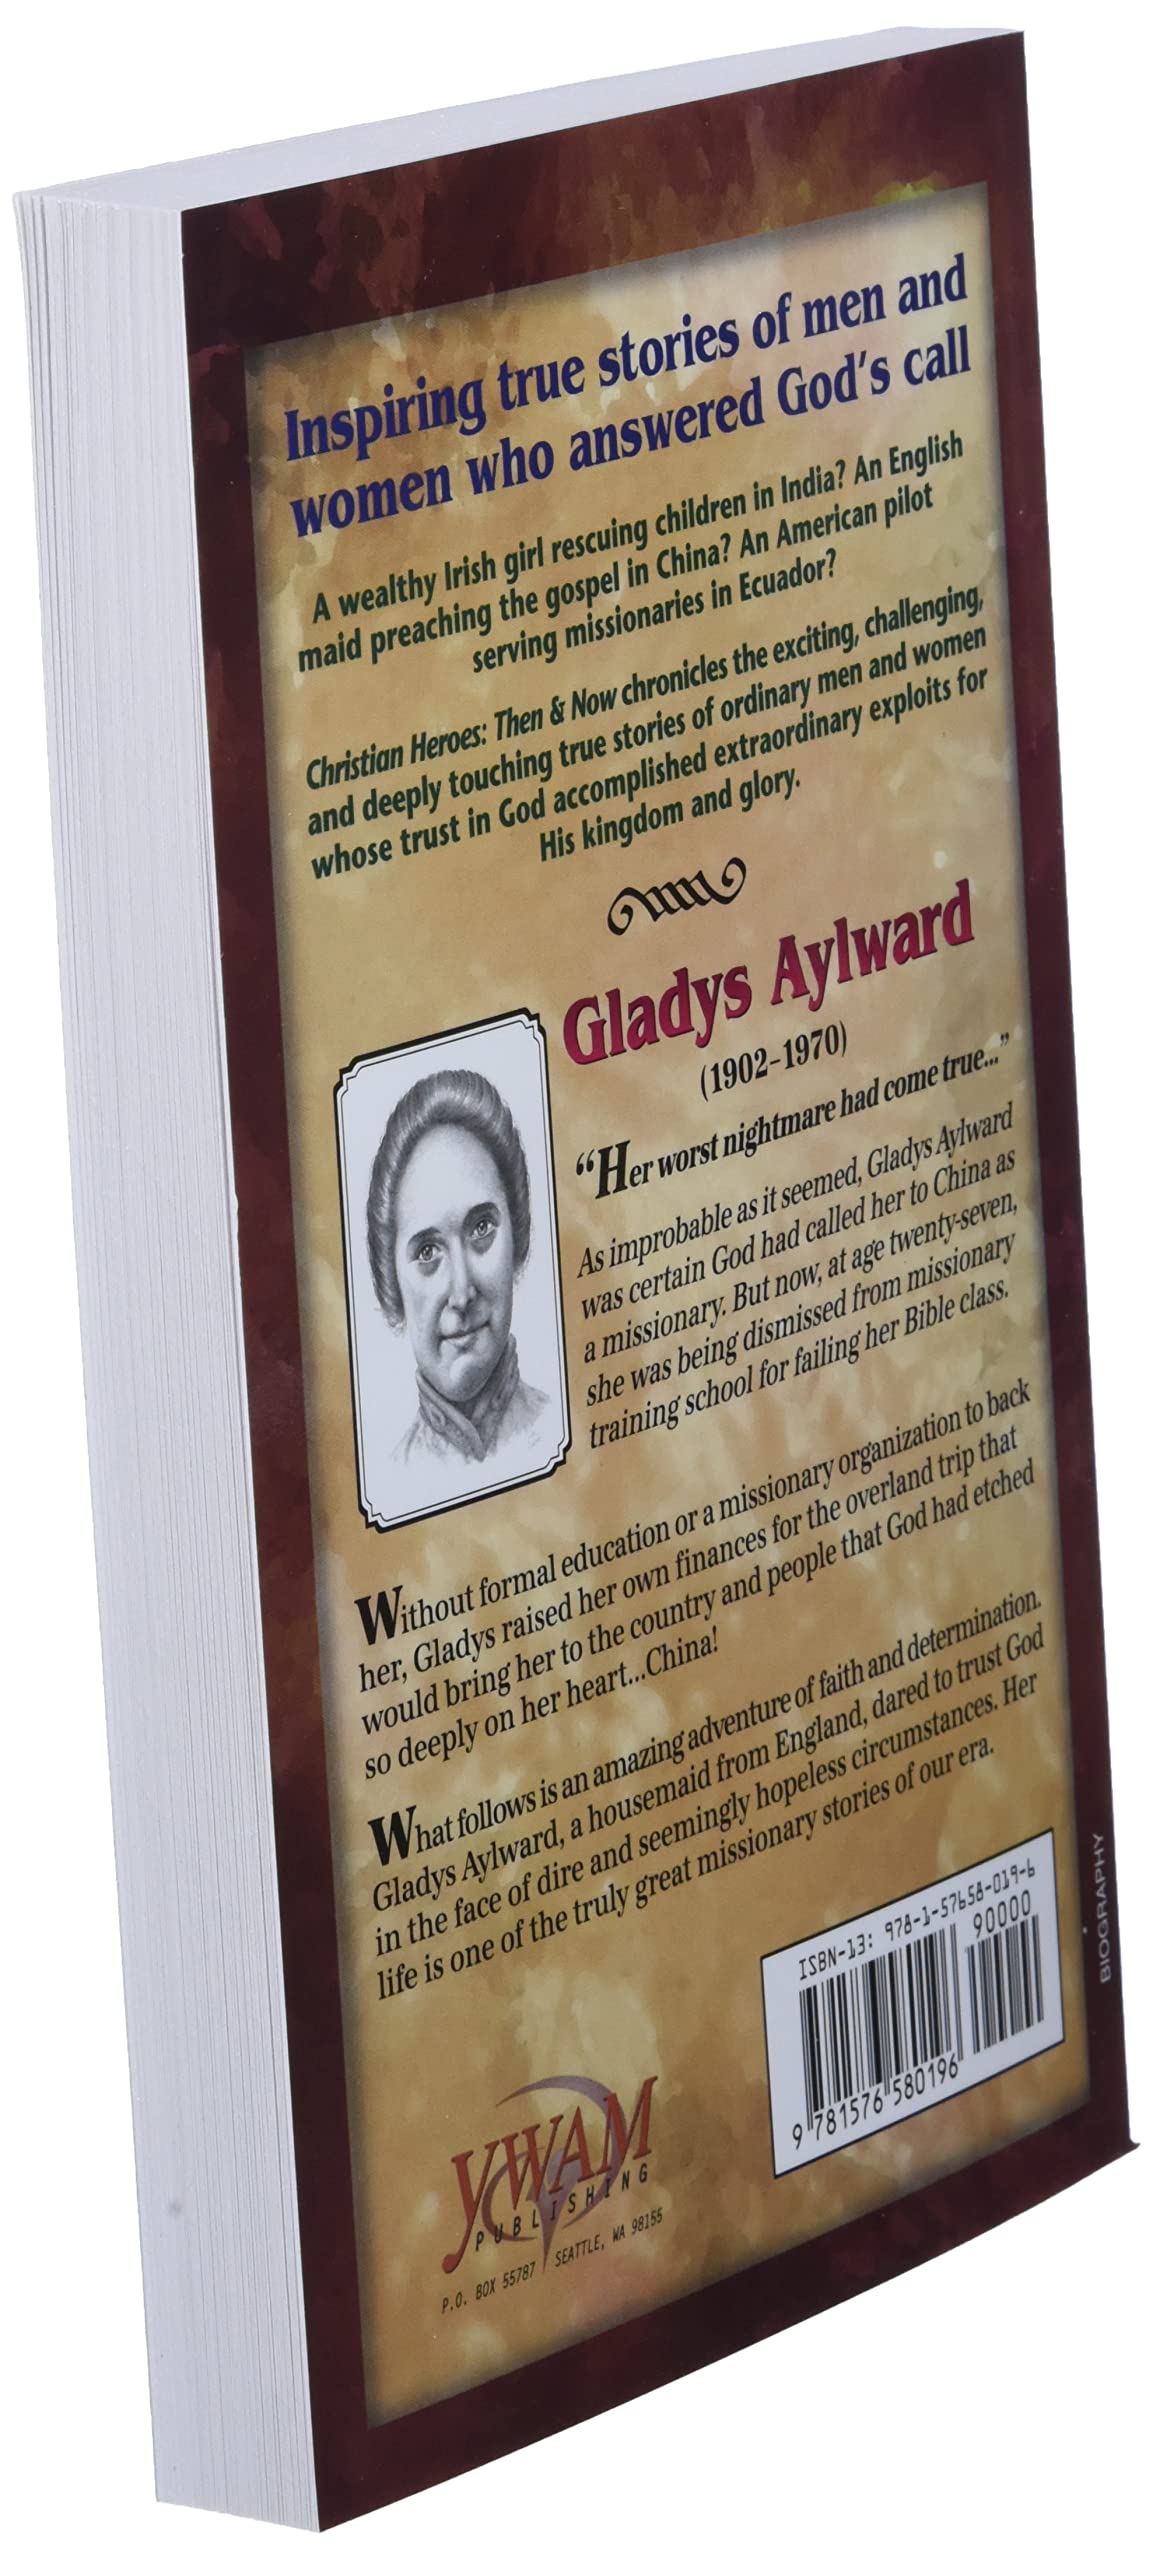 Gladys Aylward: The Adventure of a Lifetime (Christian Heroes: Then & Now)